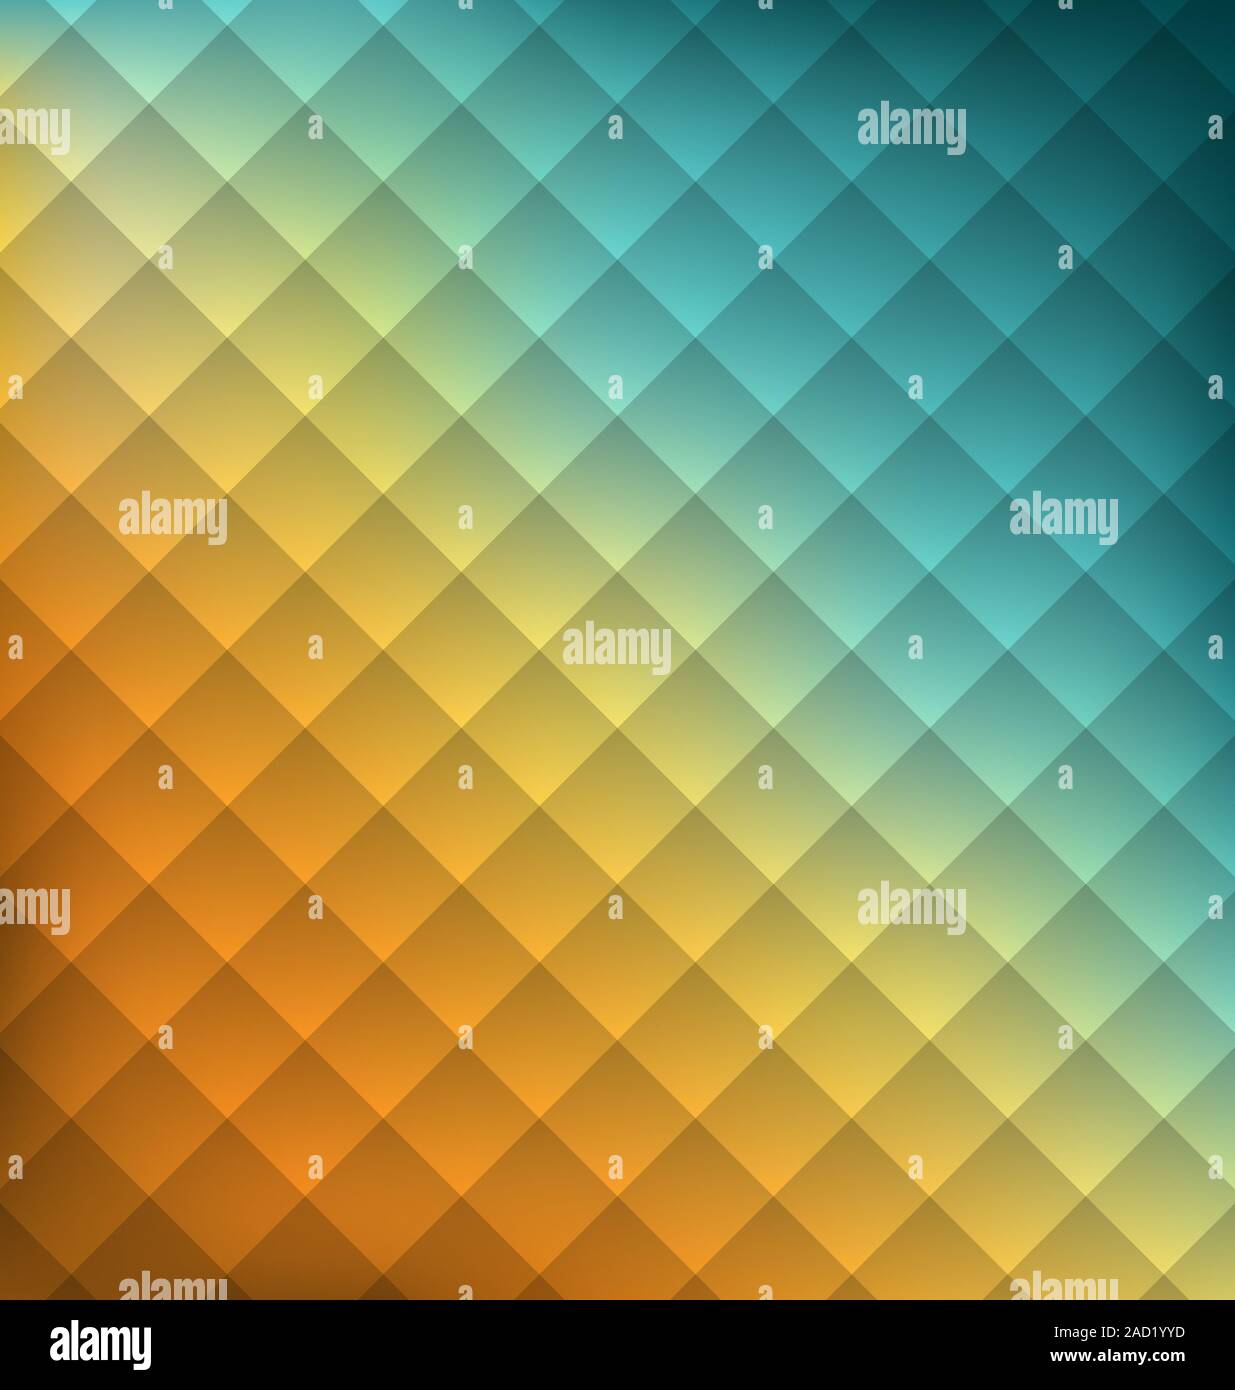 Illustration Geometrical abstraction background with squares Stock Photo